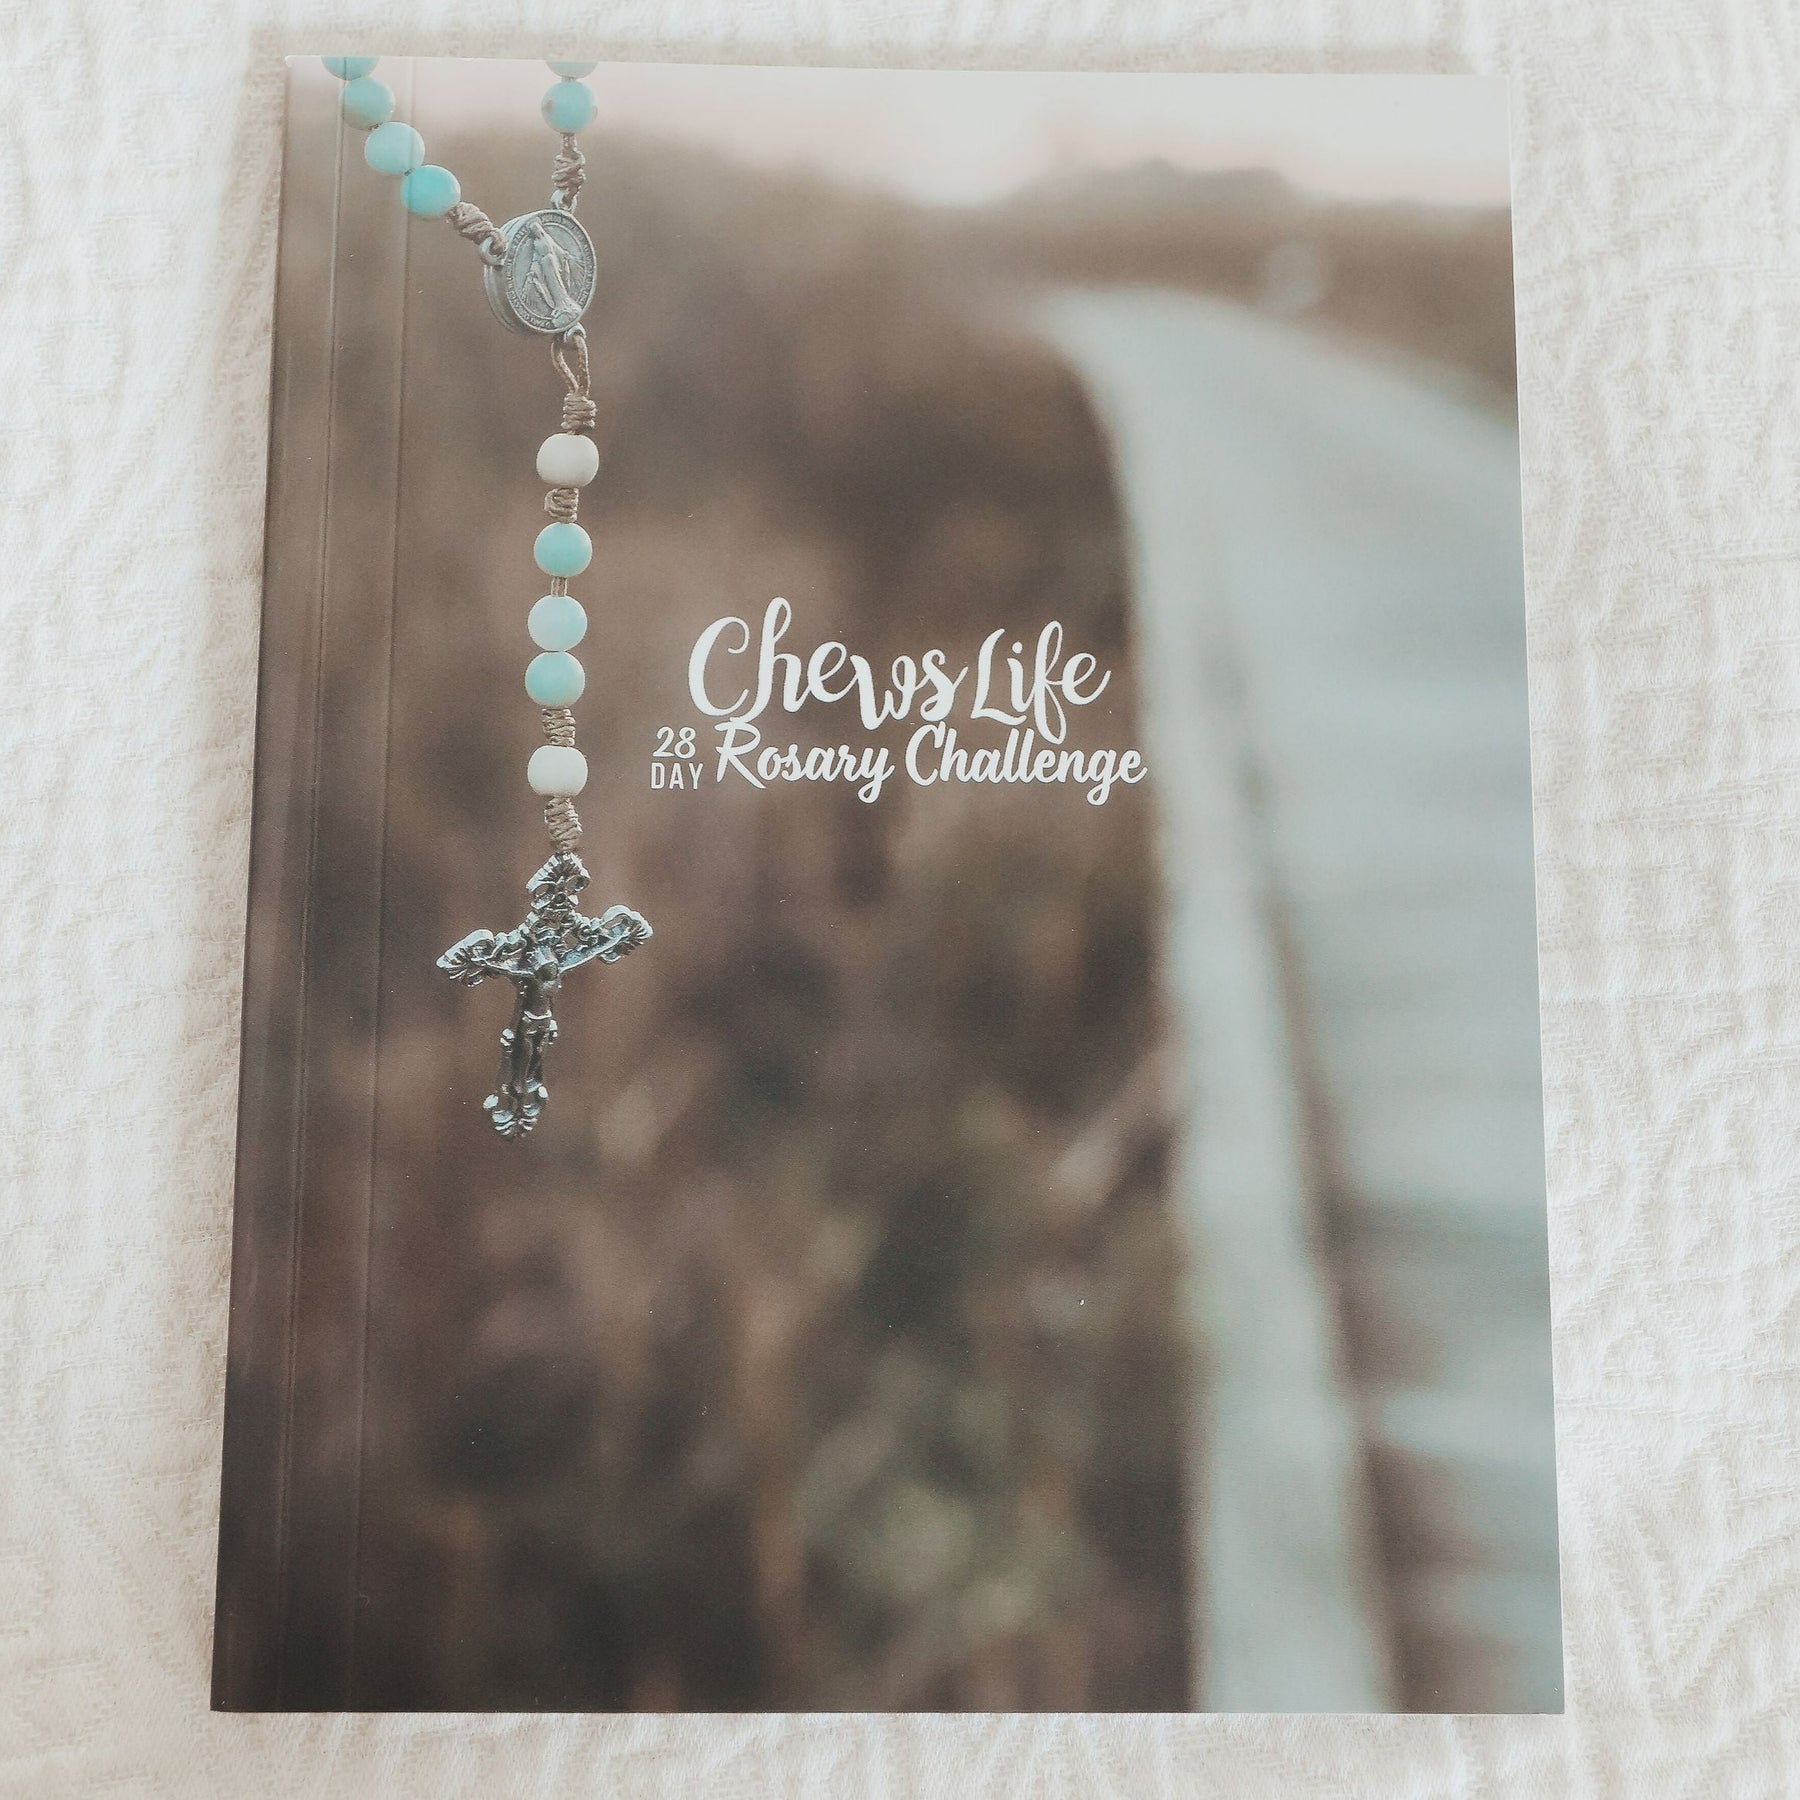 28 Day Rosary Challenge Book